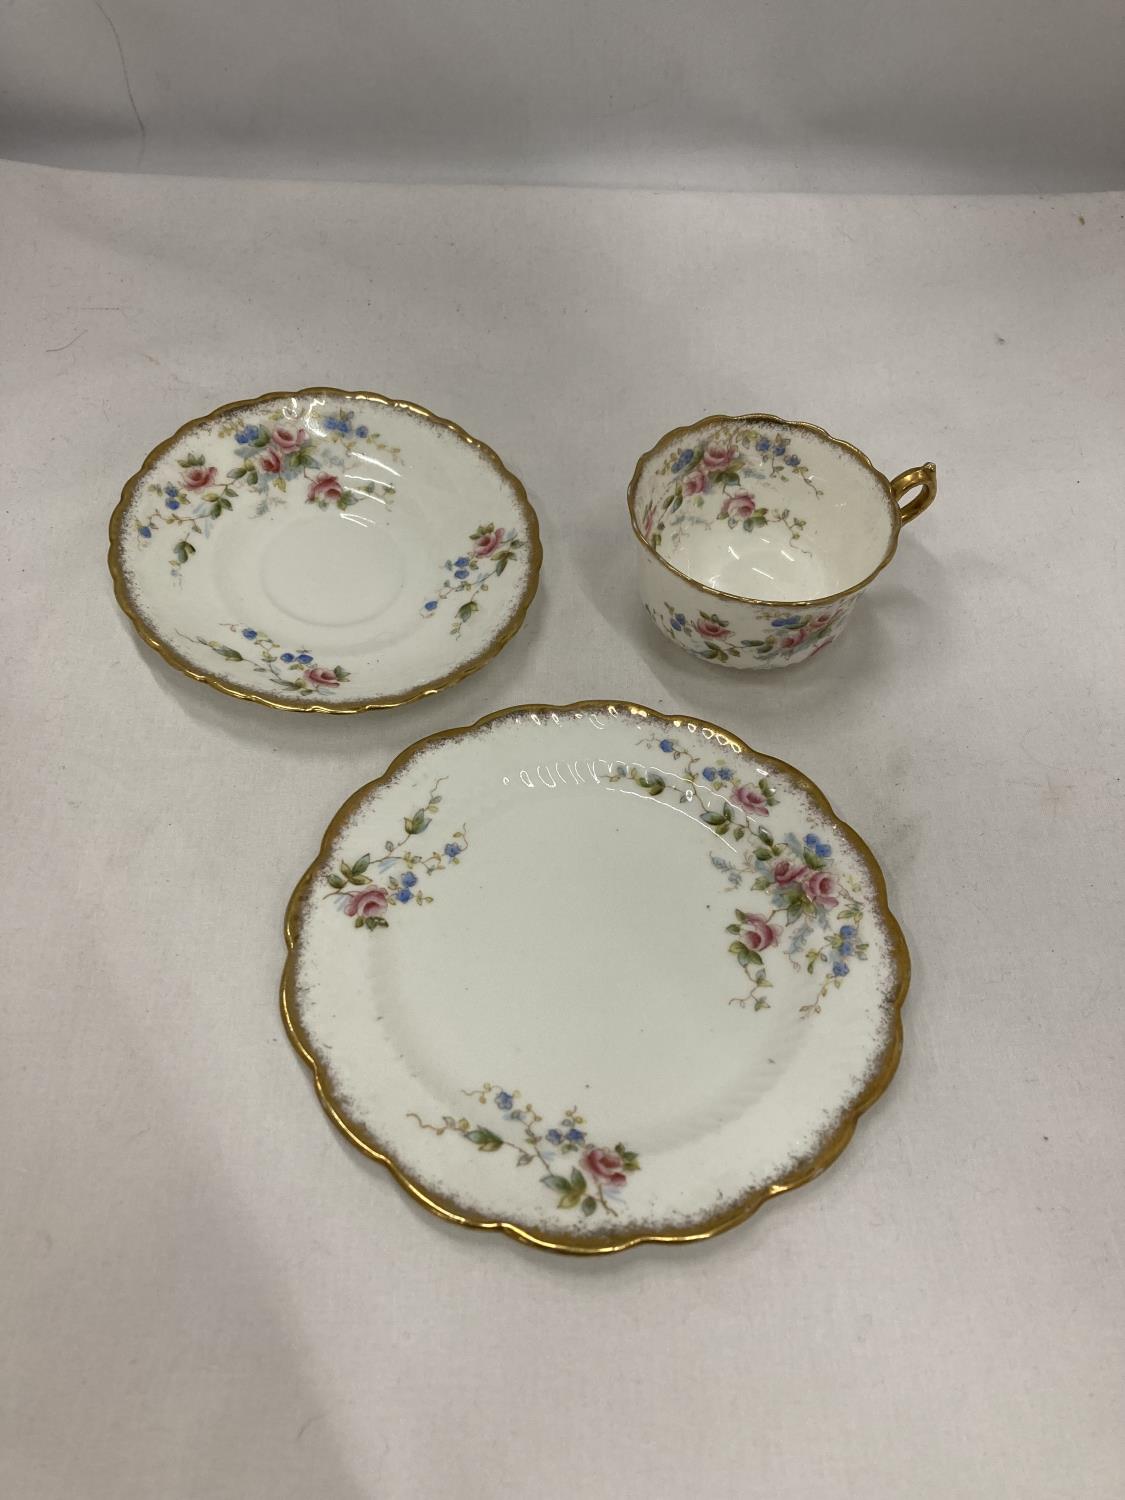 A VINTAGE PART TEASET TO INCLUDE A CAKE PLATE, CREAM JUG, SUGAR BOWL, CUPS, SAUCERS AND SIDE PLATES - Image 3 of 5